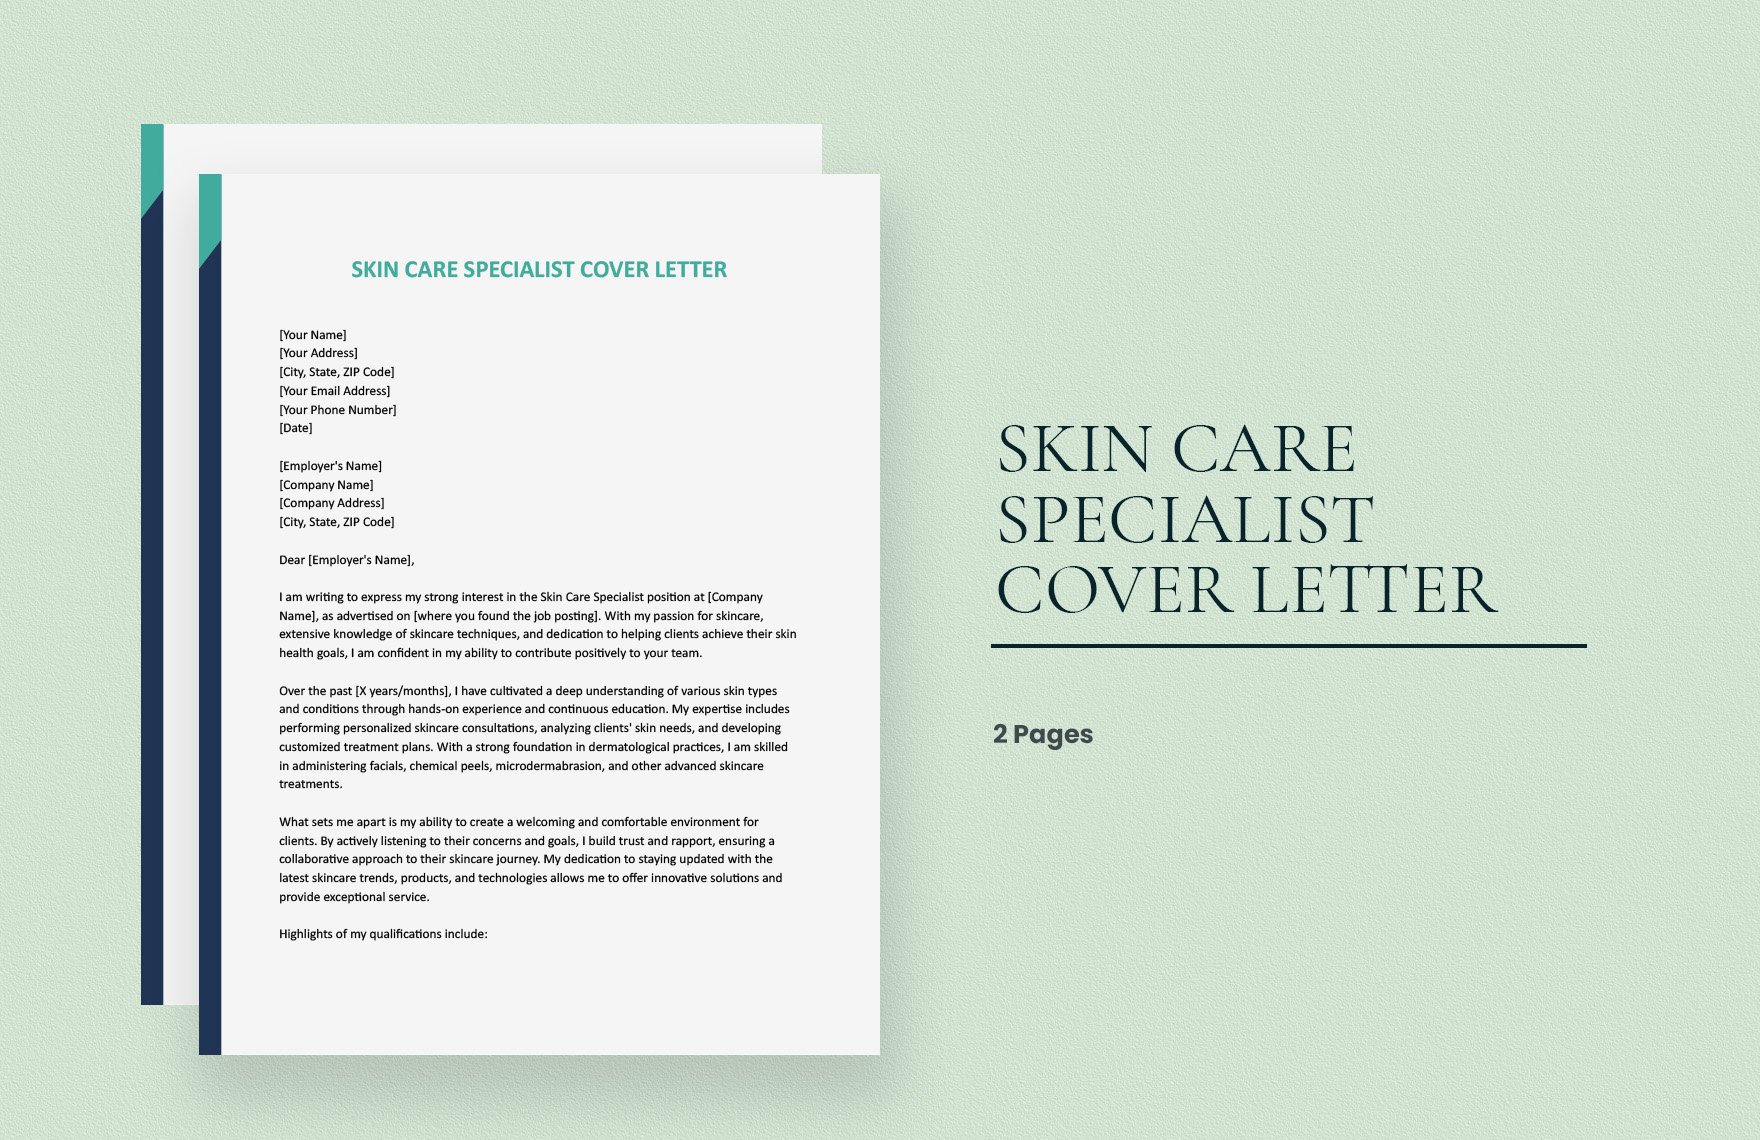 Skin Care Specialist Cover Letter